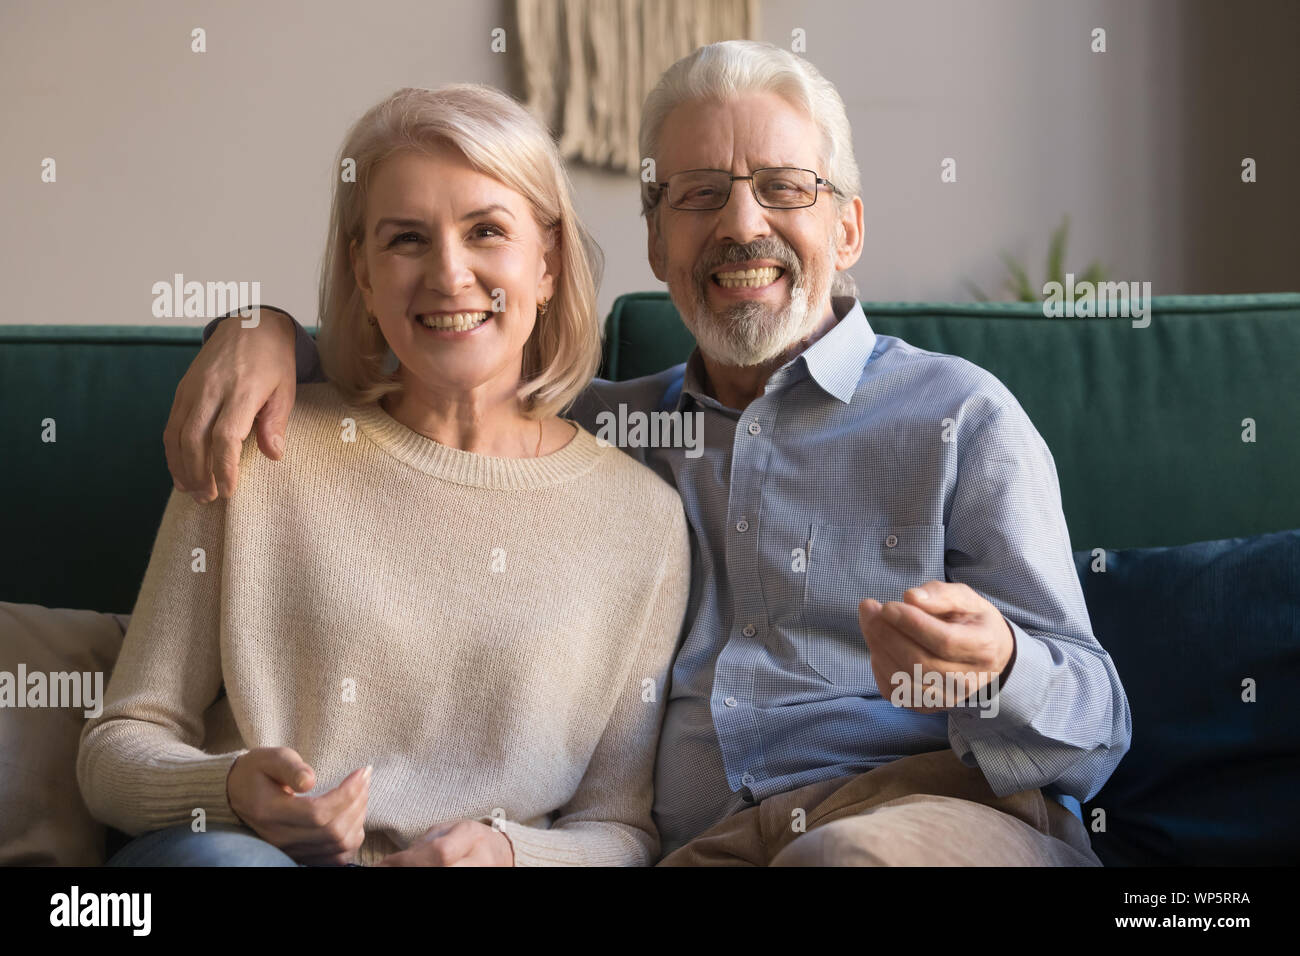 Headshot portrait of smiling mature couple sit on couch Stock Photo